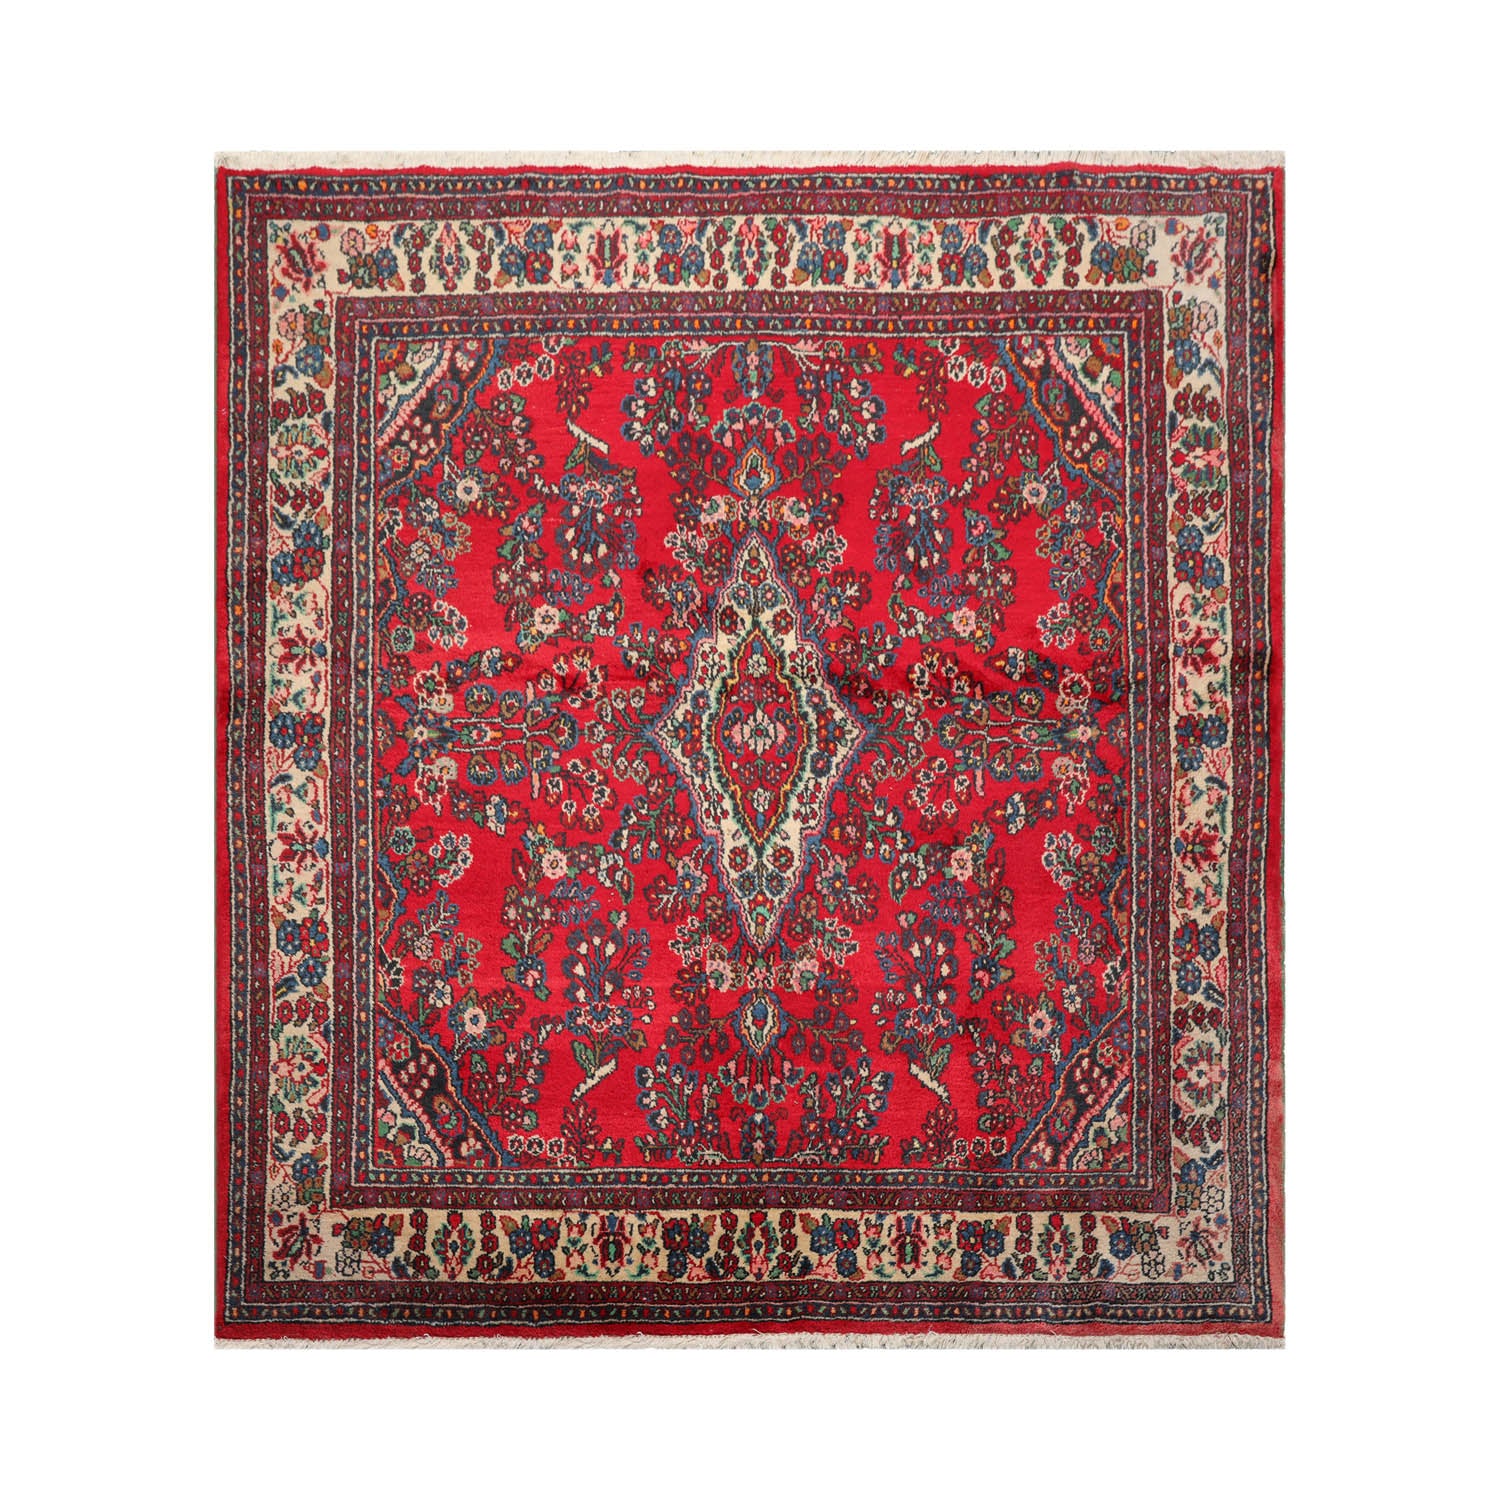 Weyer 6x9 Hand Knotted 100% Wool Designer Traditional Oriental Area Rug Red, Ivory Color